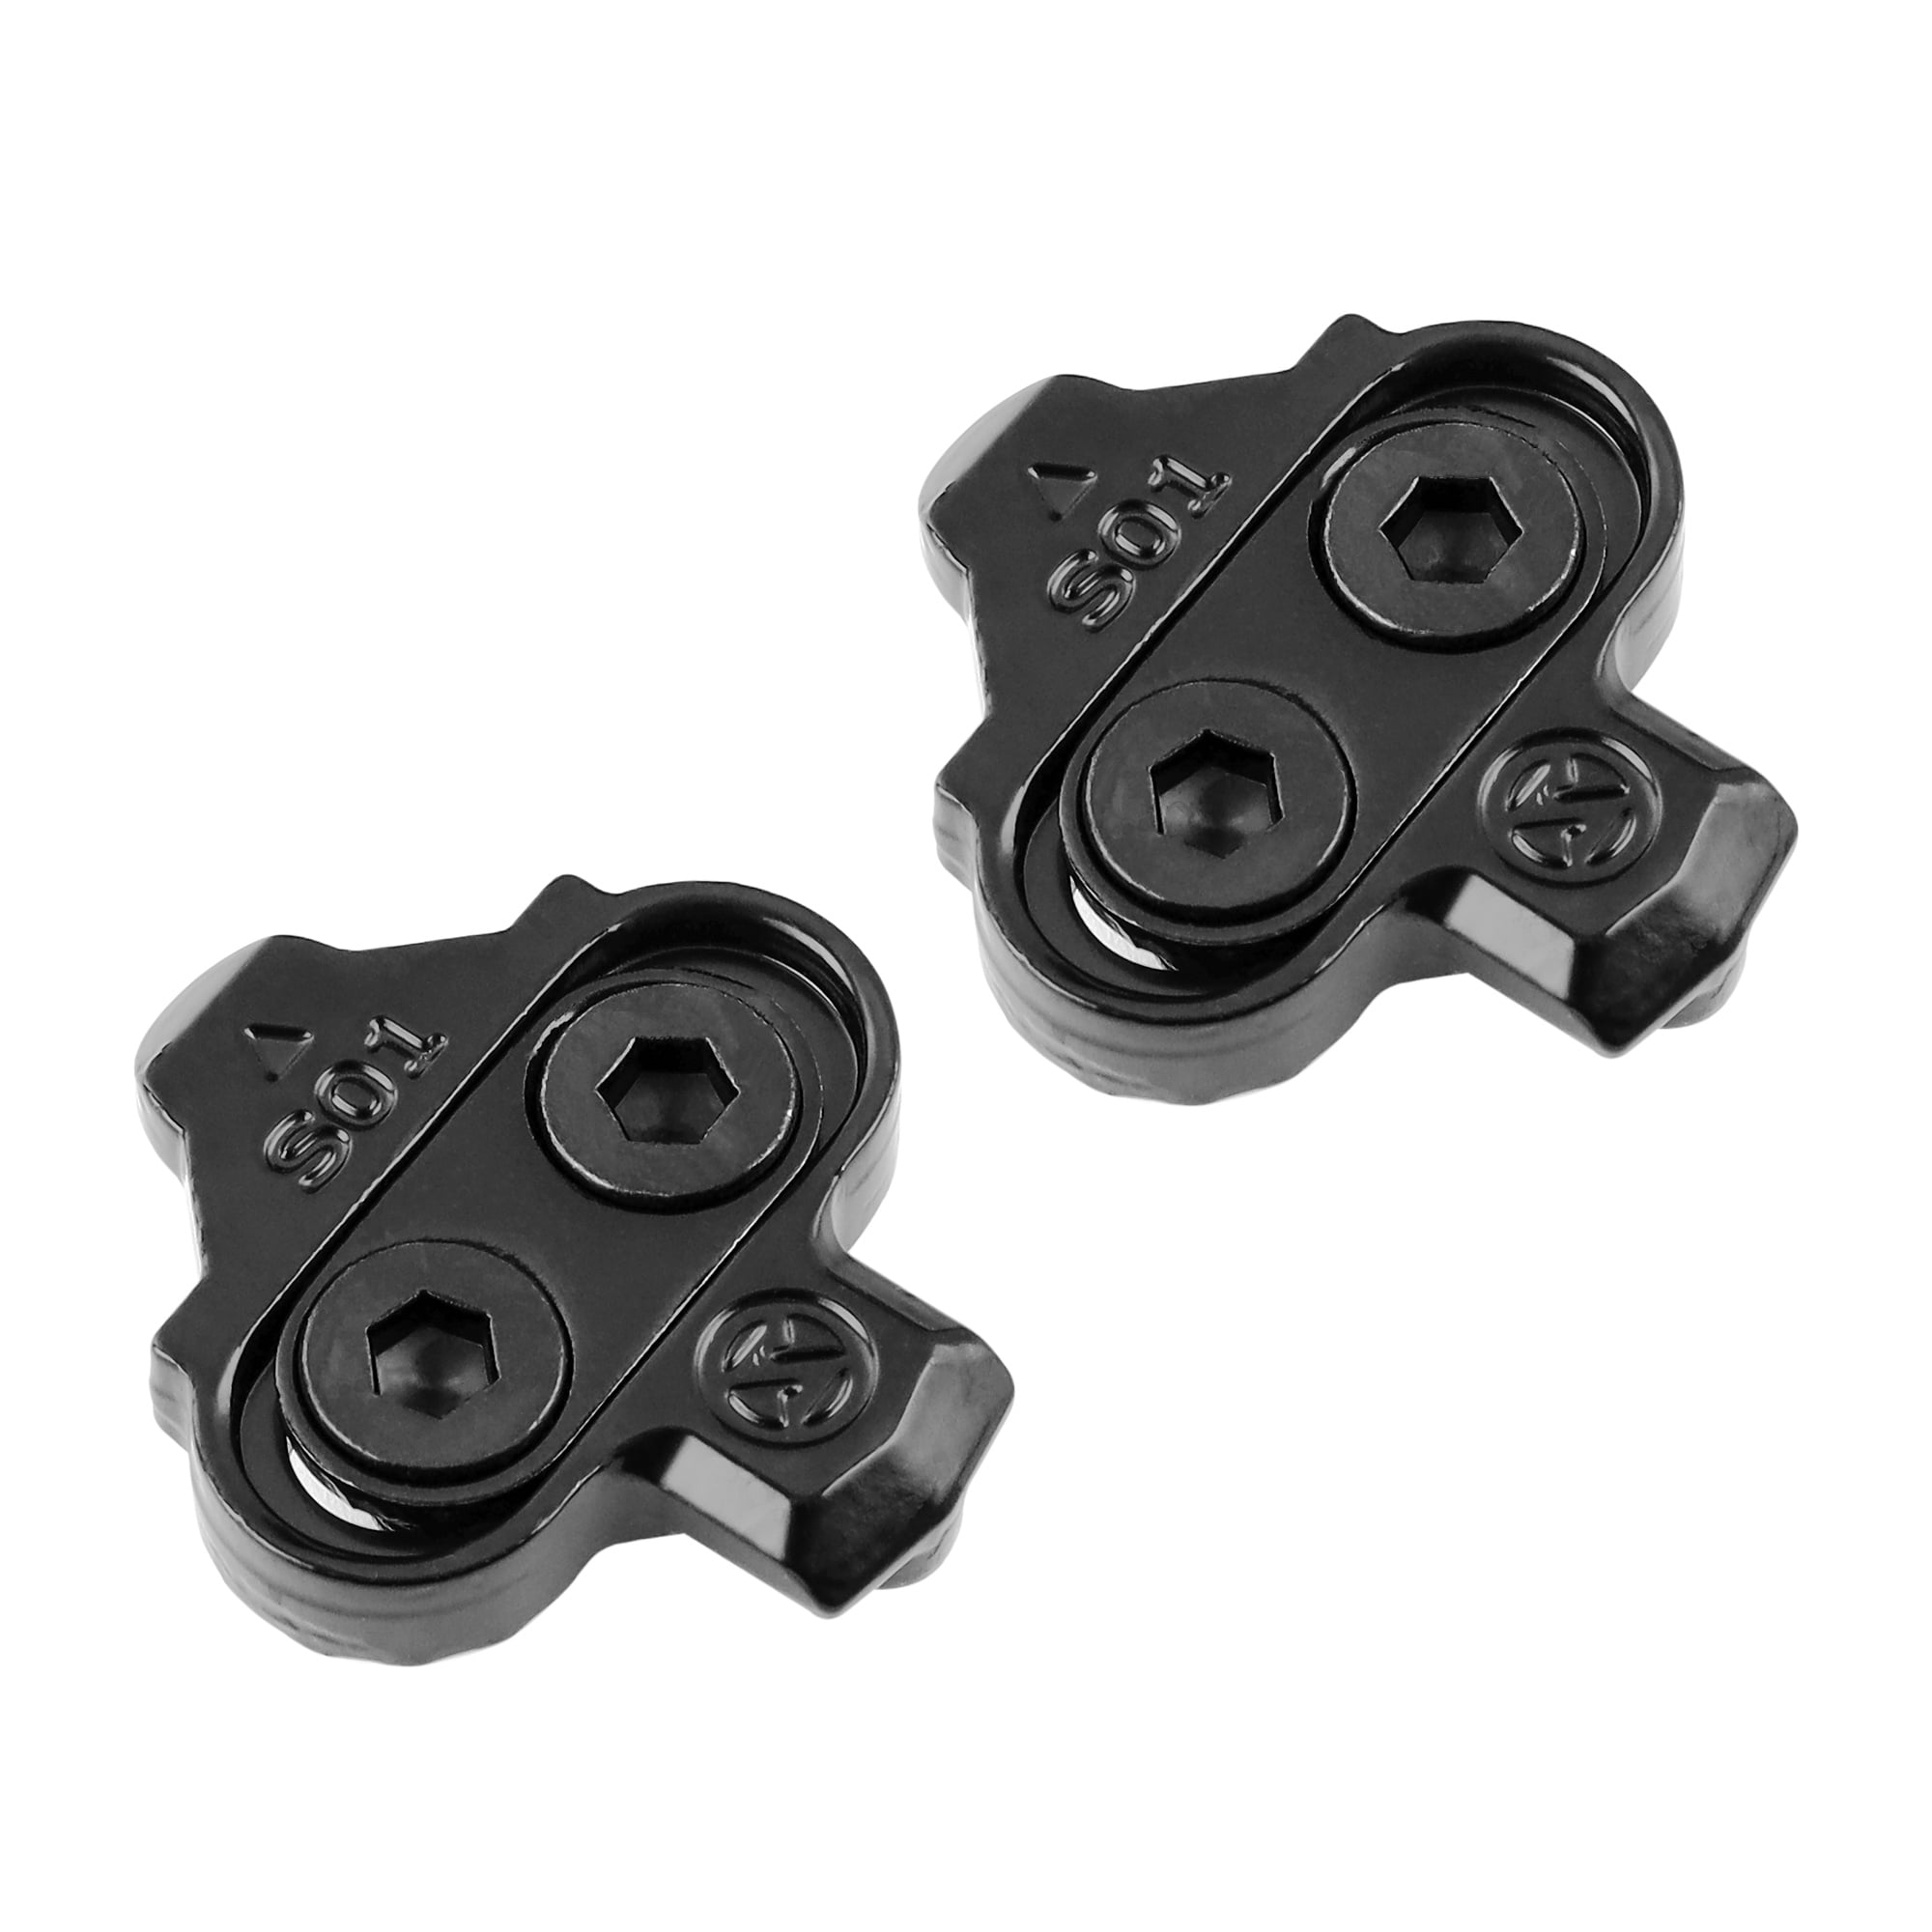 Details about   Shimano SPD SM-SH51 Single-Directional Release Cleats w/o Cleat Plate Nuts/Bolts 